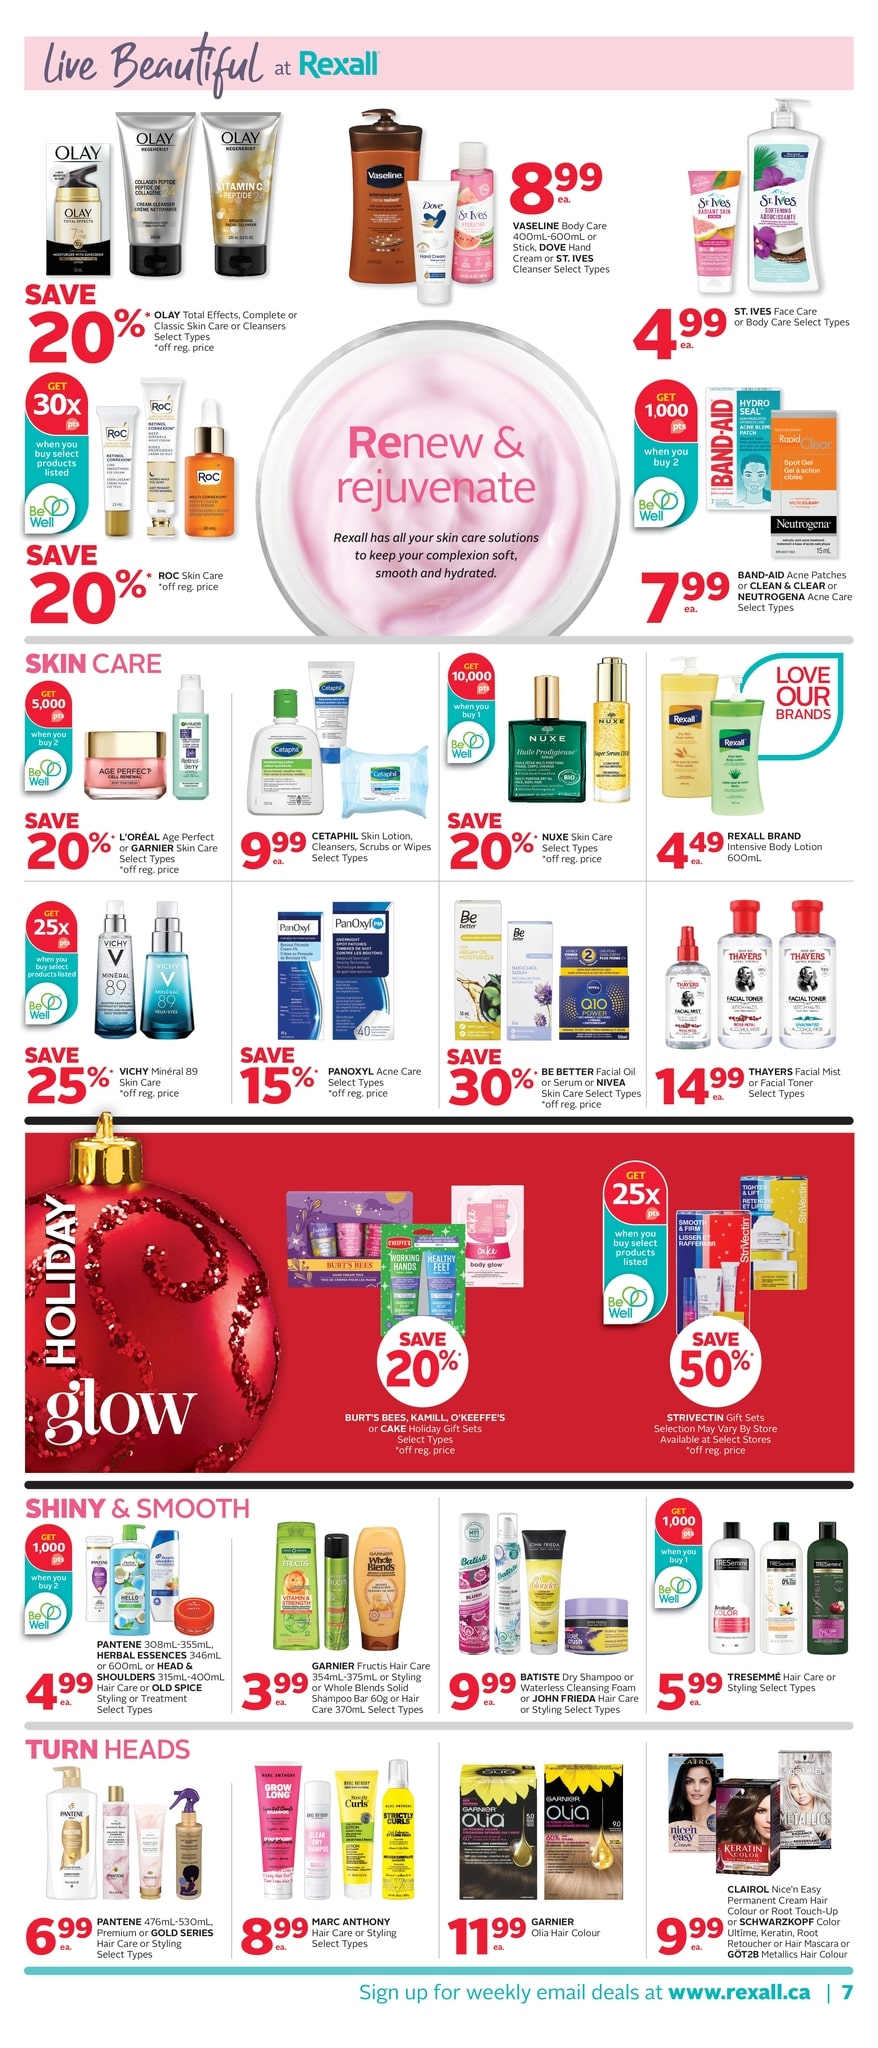 Rexall - Weekly Flyer Specials - Black Friday Deals - Page 12